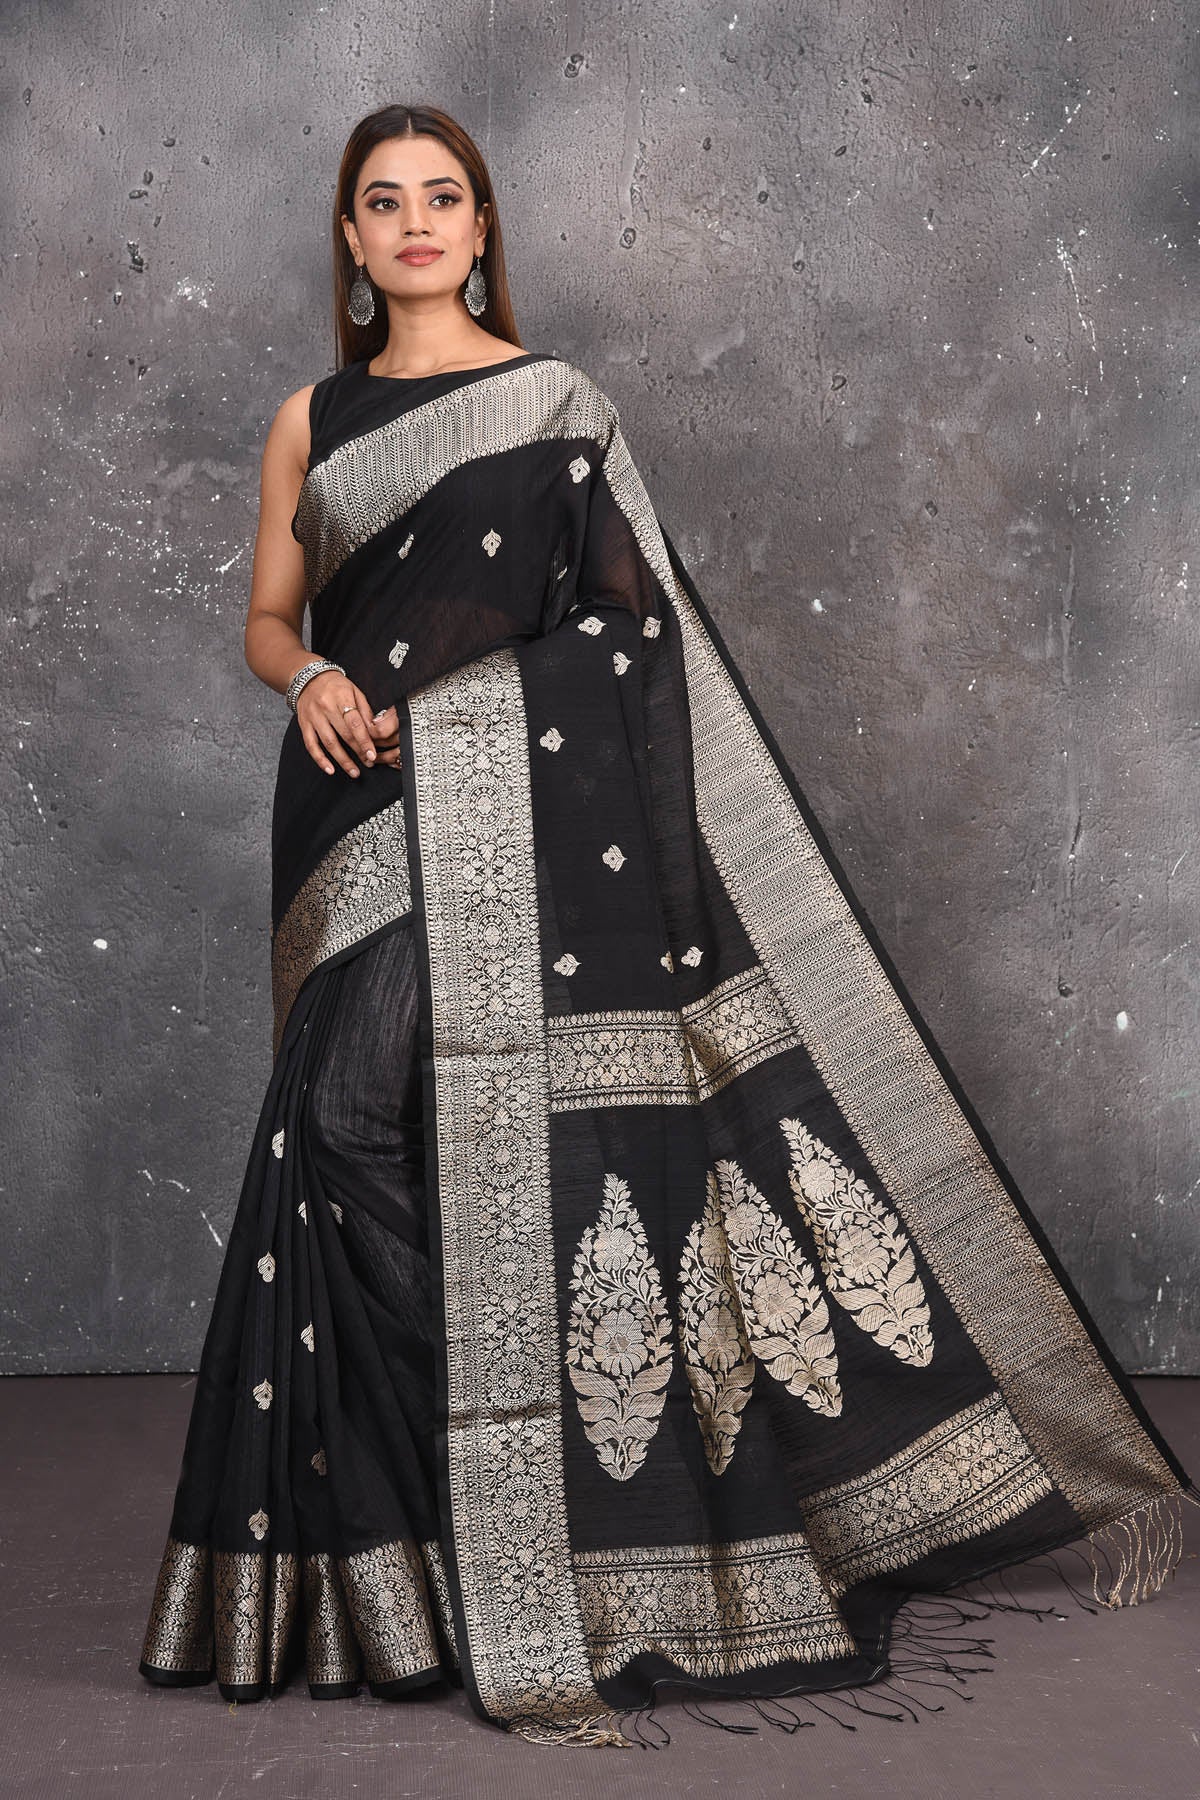 Buy elegant black zari woven matka Silk Banarasi saree with zari broad border online in USA which has crafted by skilled weaver of Banaras with elegance and grace, this saree is definitely the epitome of beauty and a must have in your collection. Buy designer handwoven banarasi brocade sari with any blouse from Pure Elegance Indian saree store in USA. -Full view.